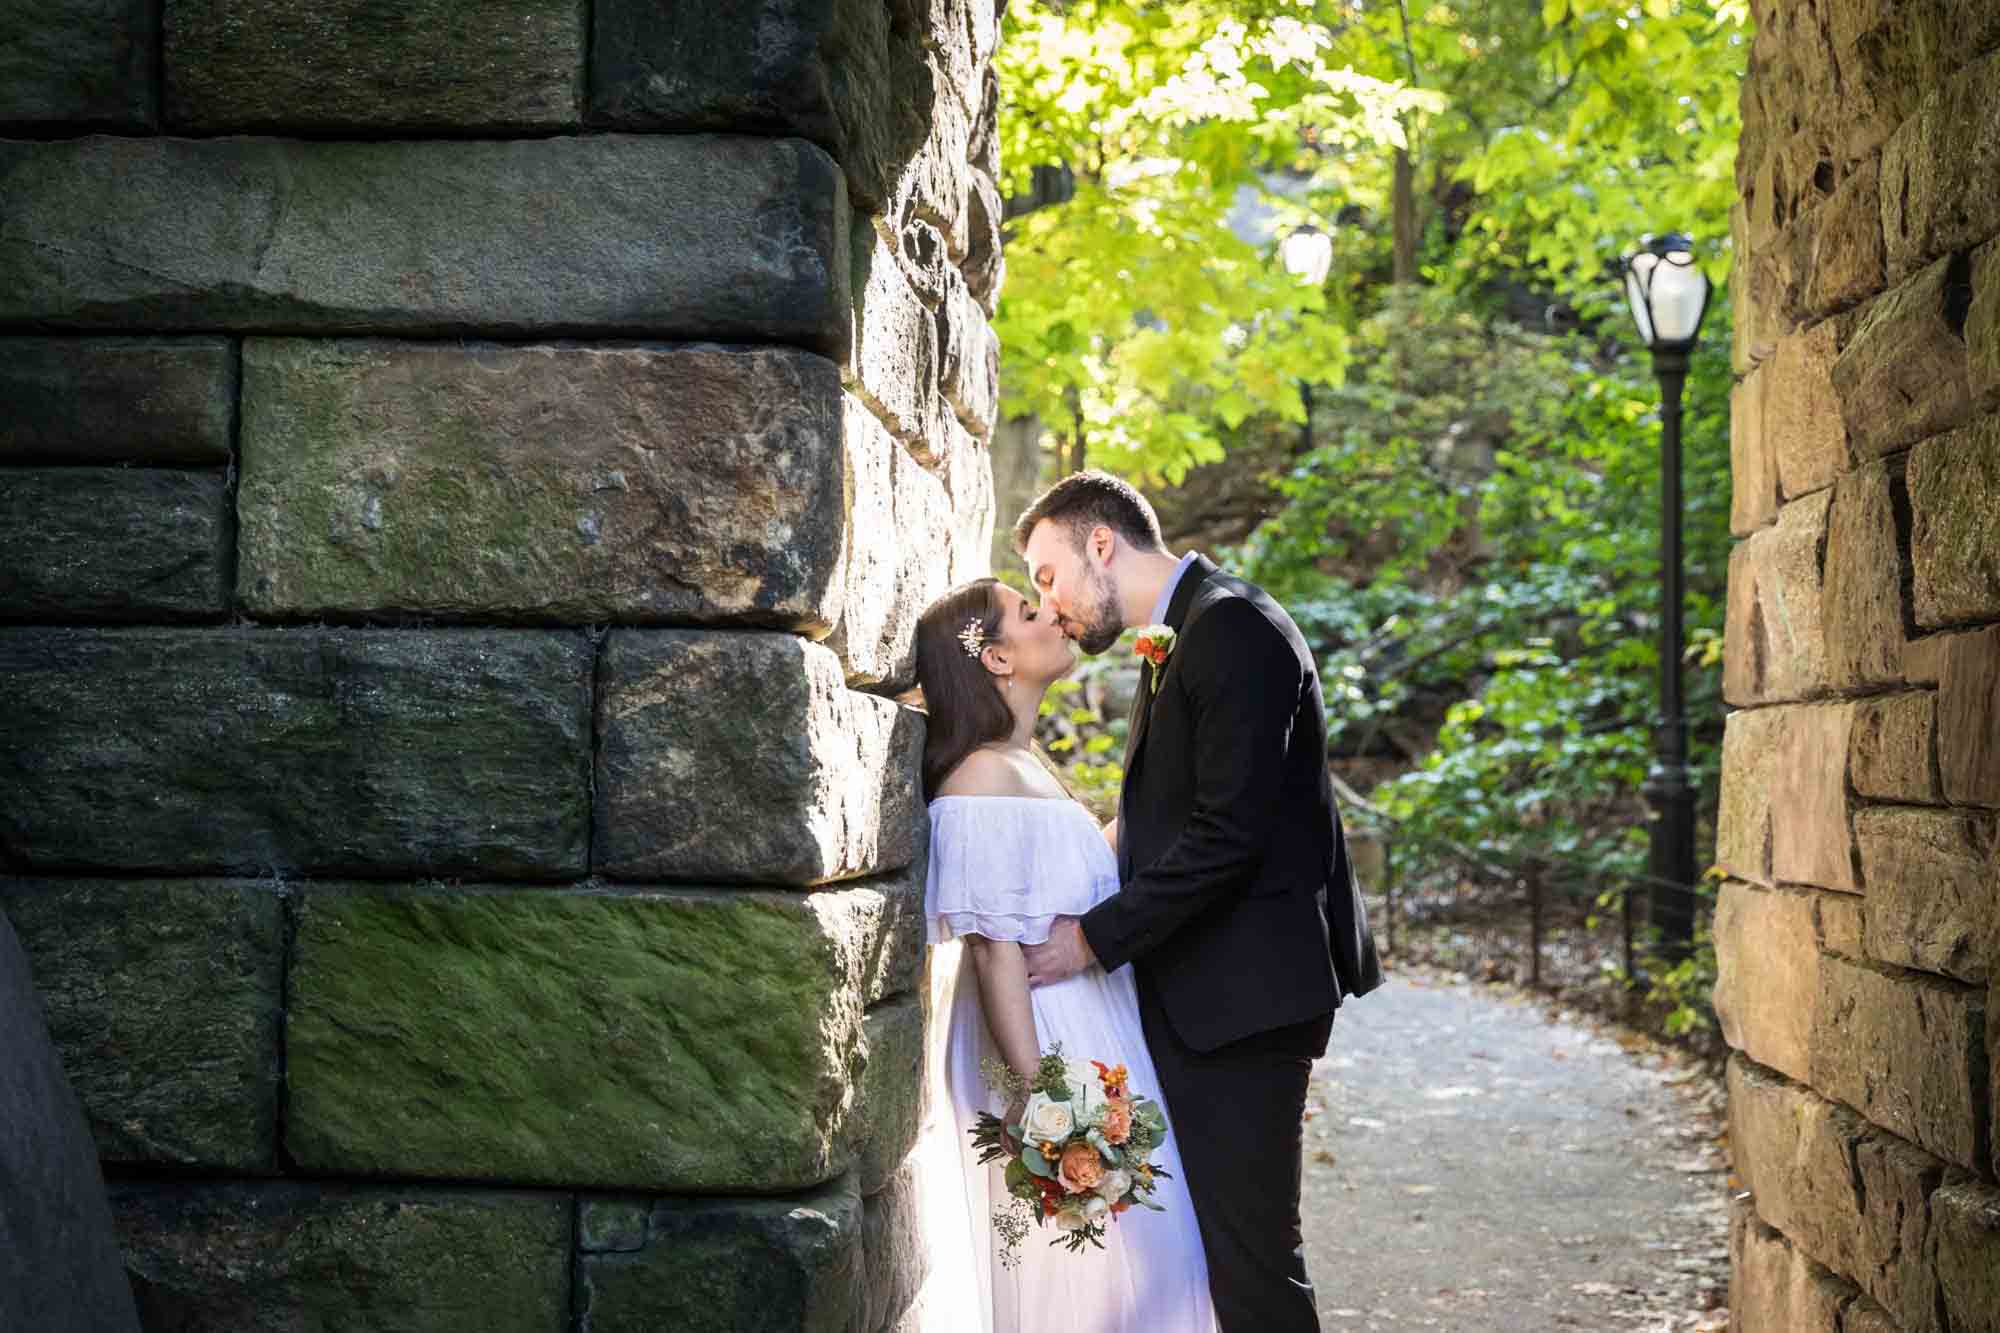 Bride and groom kissing under stone arch Article on how to elope in Central Park by NYC wedding photojournalist, Kelly Williams. Includes photos from a real wedding near Bow Bridge.